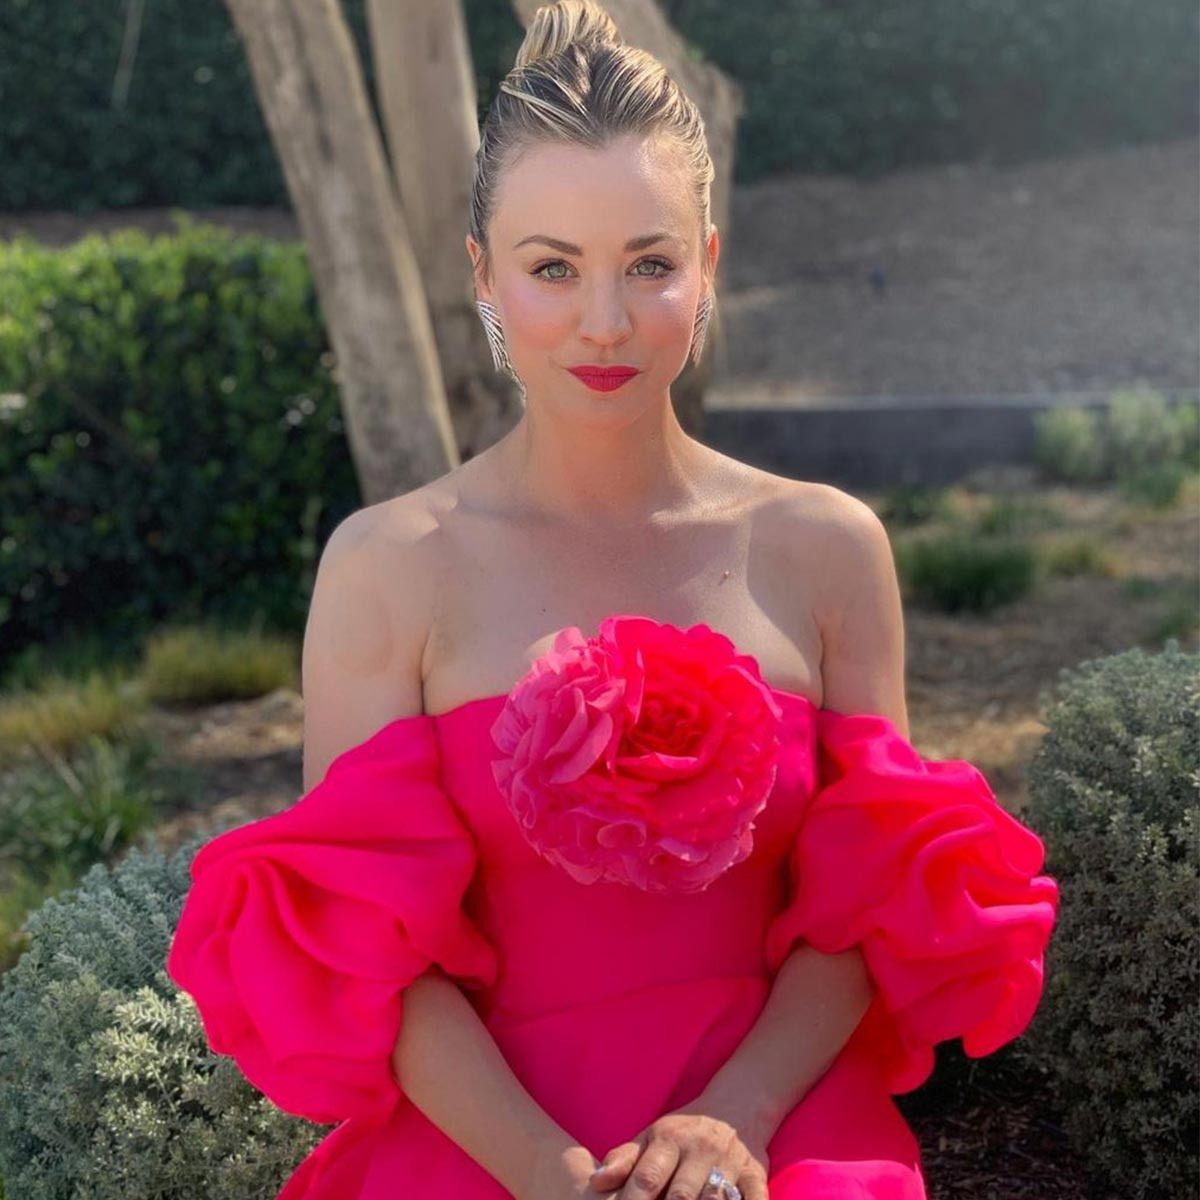 Kaley Cuoco News, Pictures, and Videos - E! Online